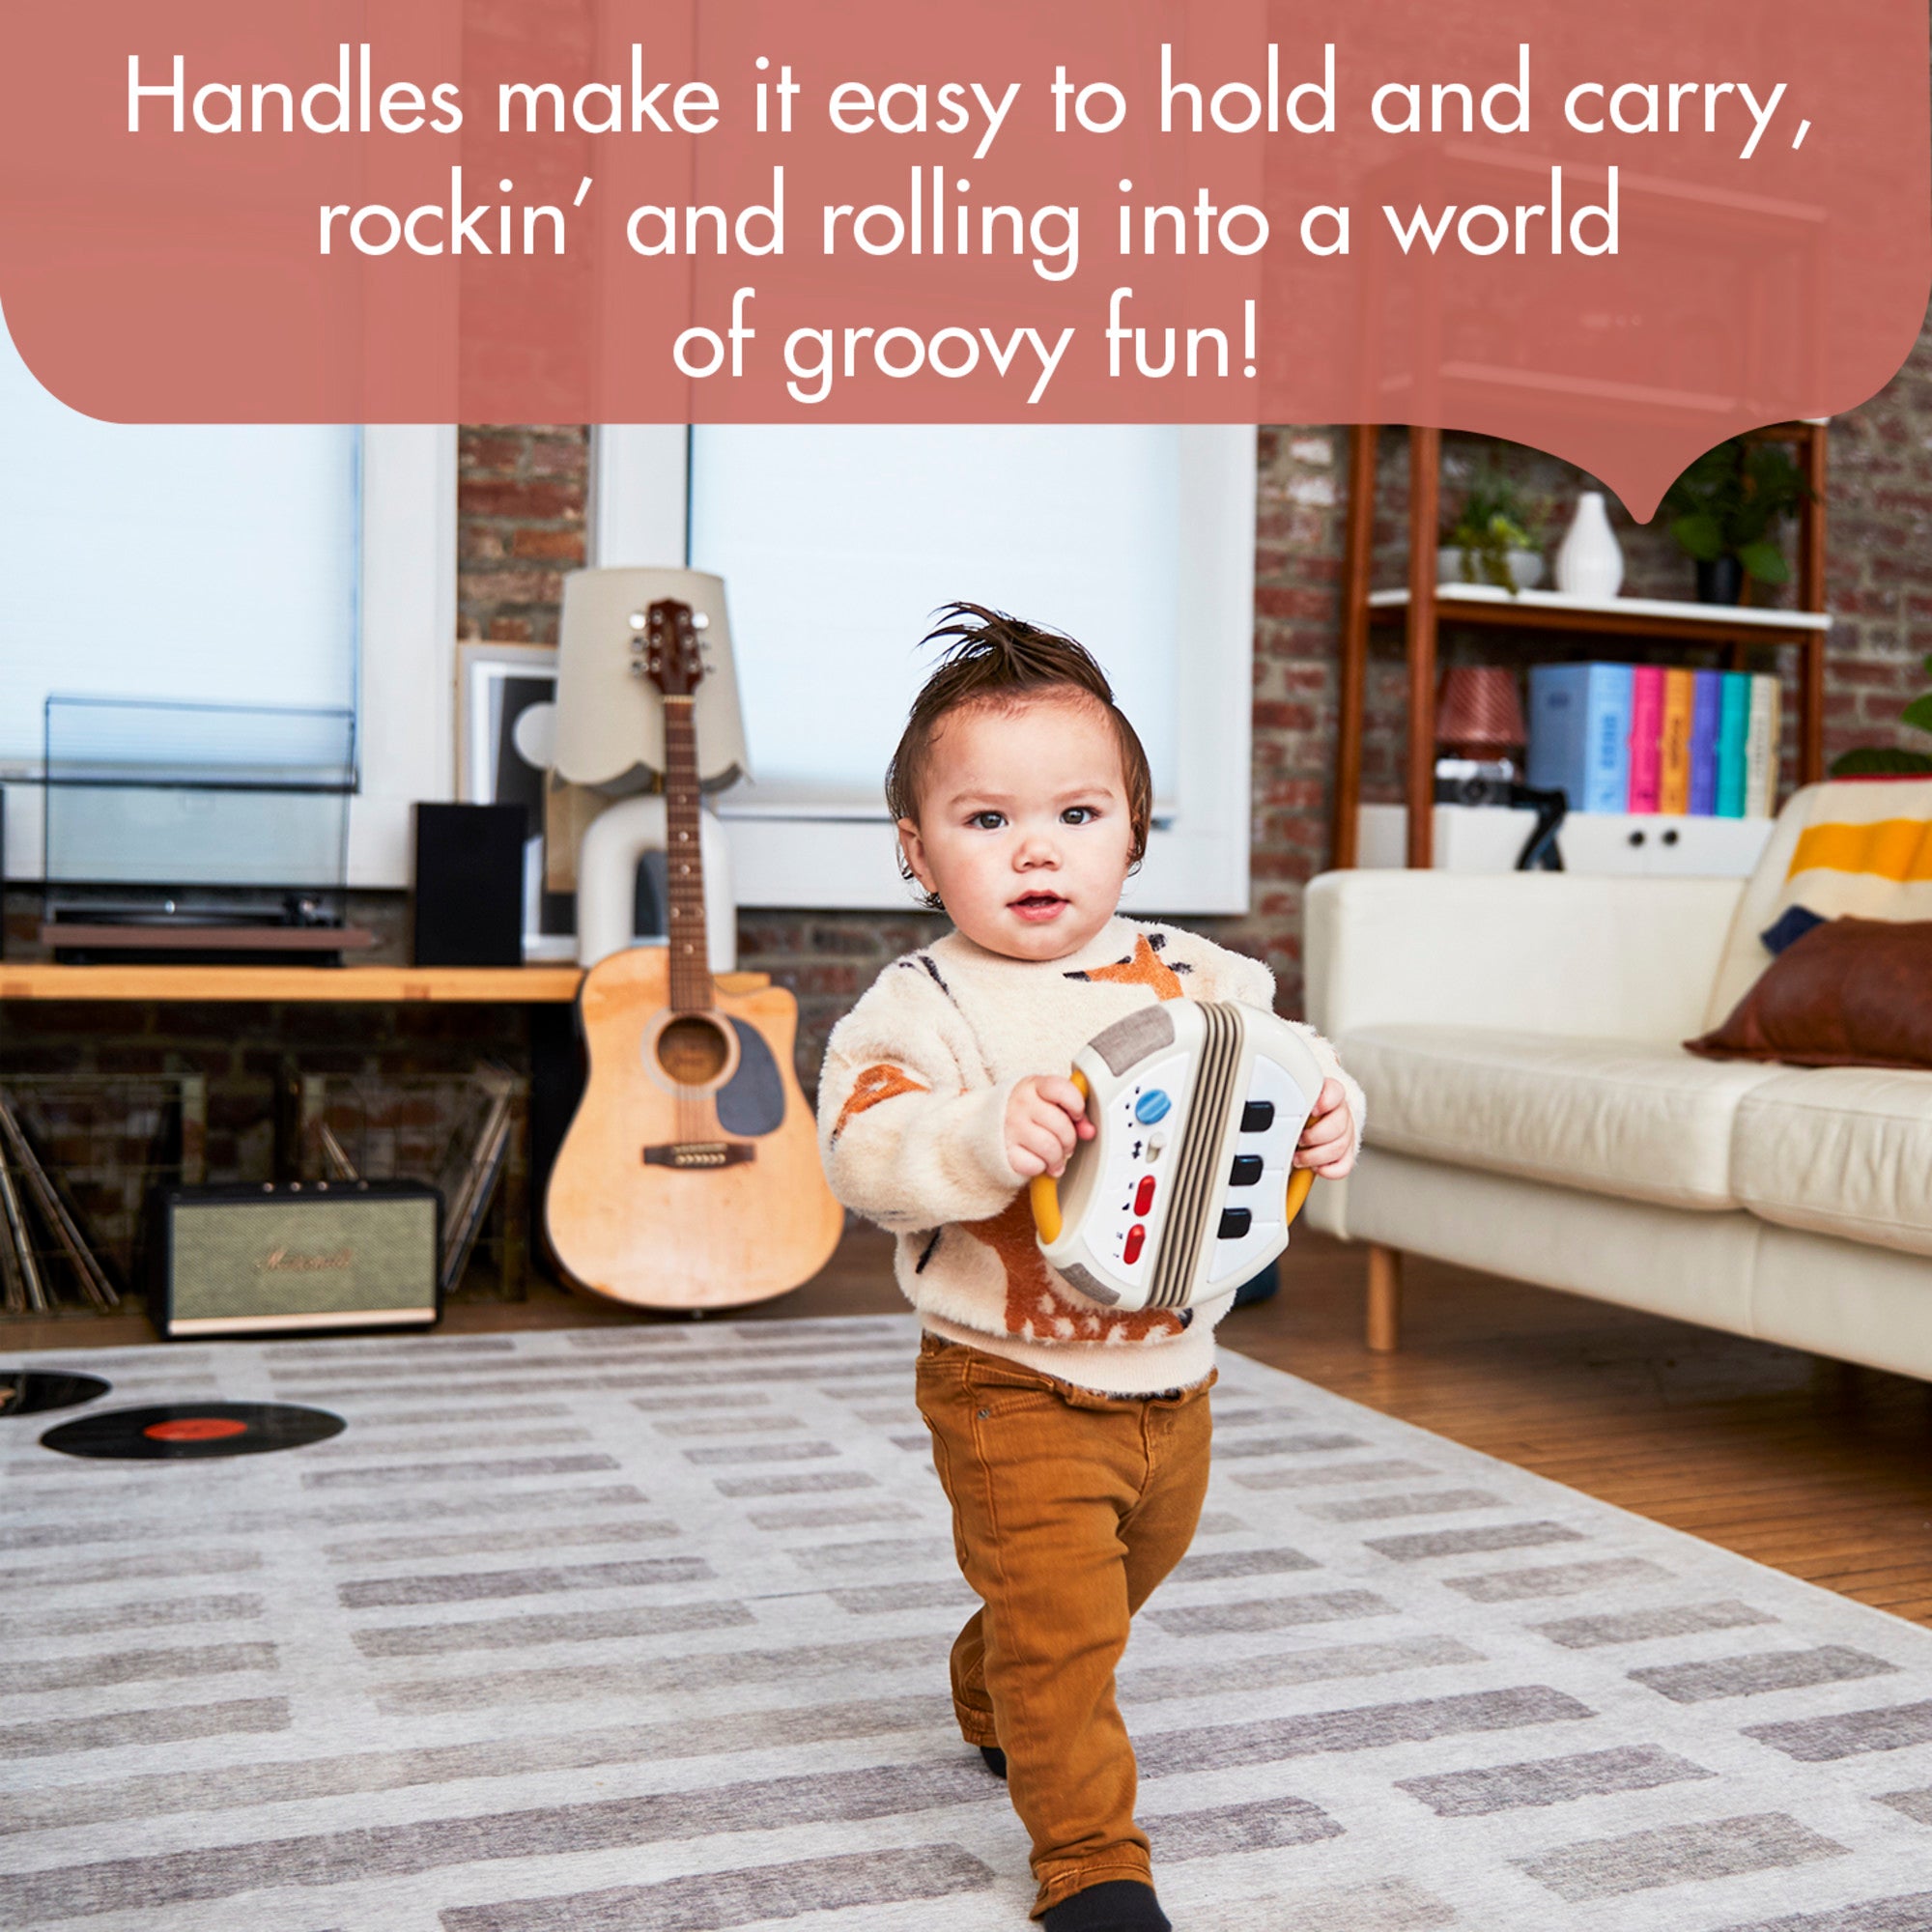 Tiny Rockers Accordion - Encourages children and parents to discover sounds and melodies together